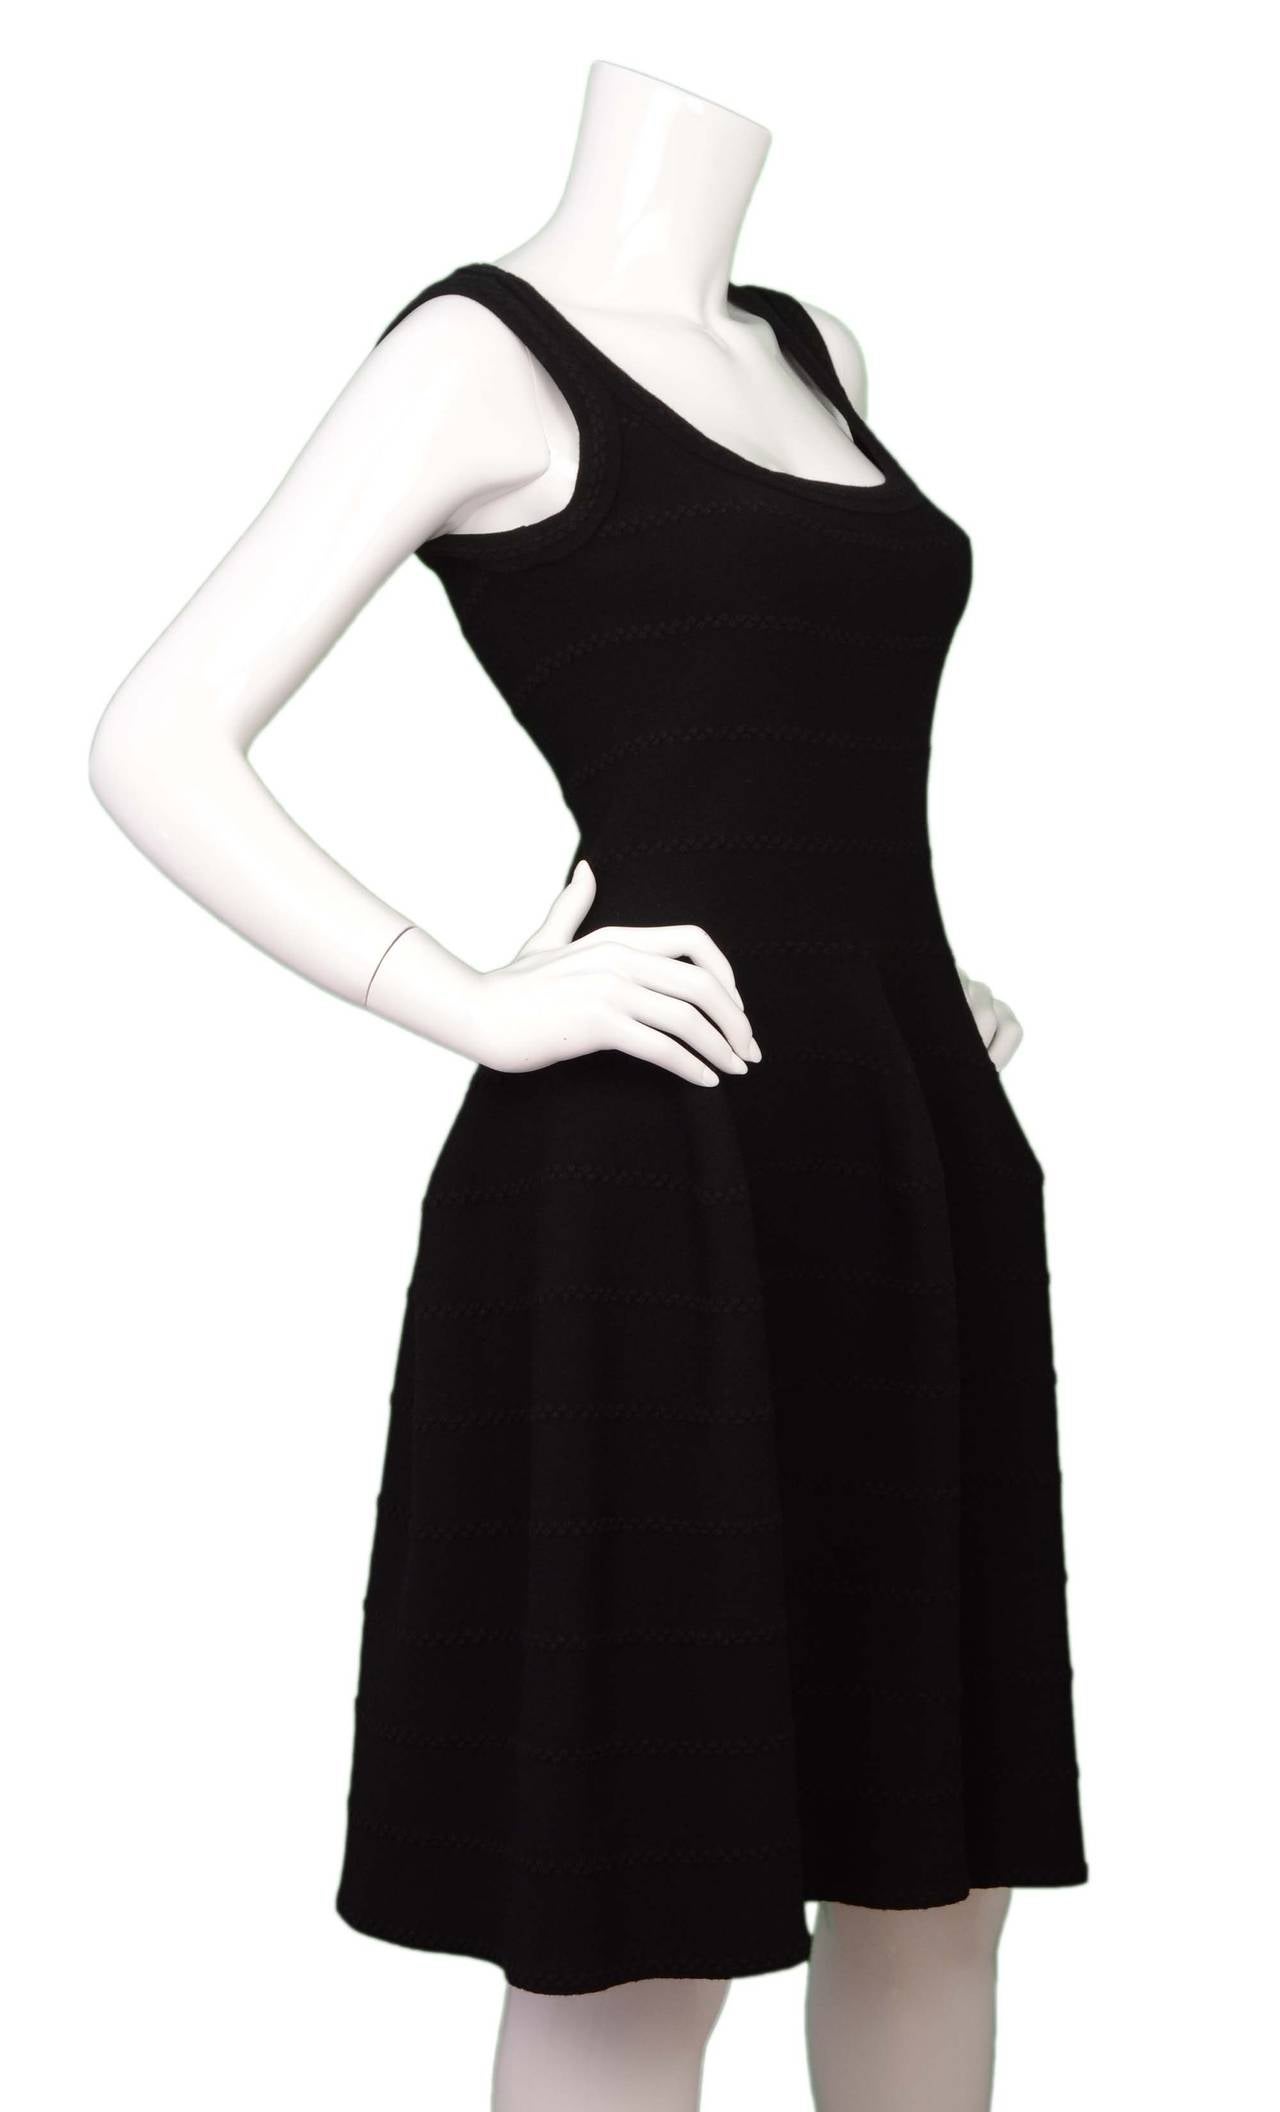 Alaia Black Knit Fit Flare Dress
Features scoop neckline and black metallic textured stripe design 

Made in: Italy
Color: Black
Composition: 45% viscose, 35% wool,15% polyester, 5% nylon
Lining: None
Closure/opening: Back center zip up
Exterior